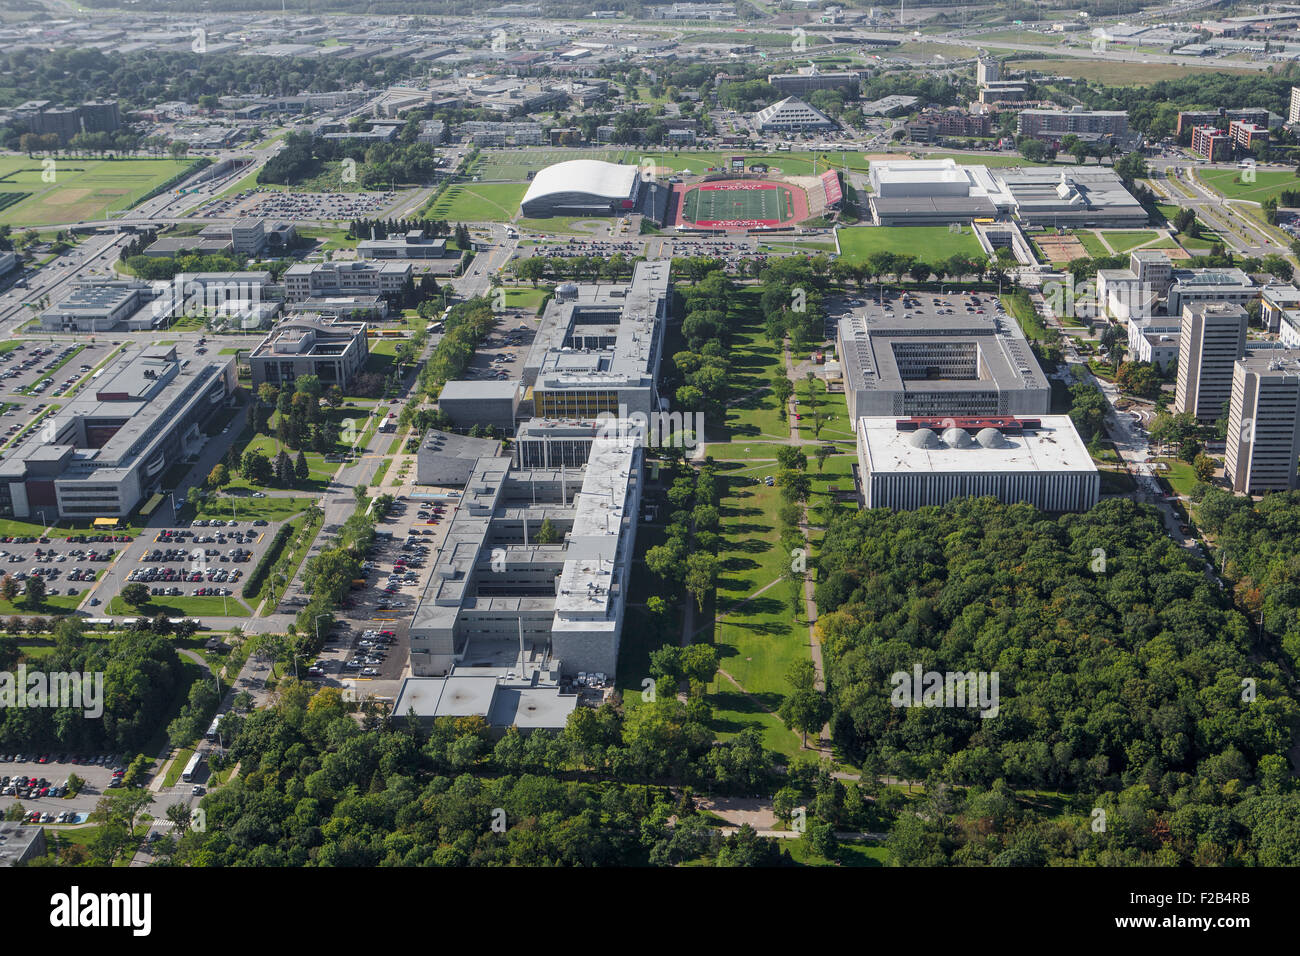 Universite Laval university is pictured in this aerial photo in Quebec city Stock Photo